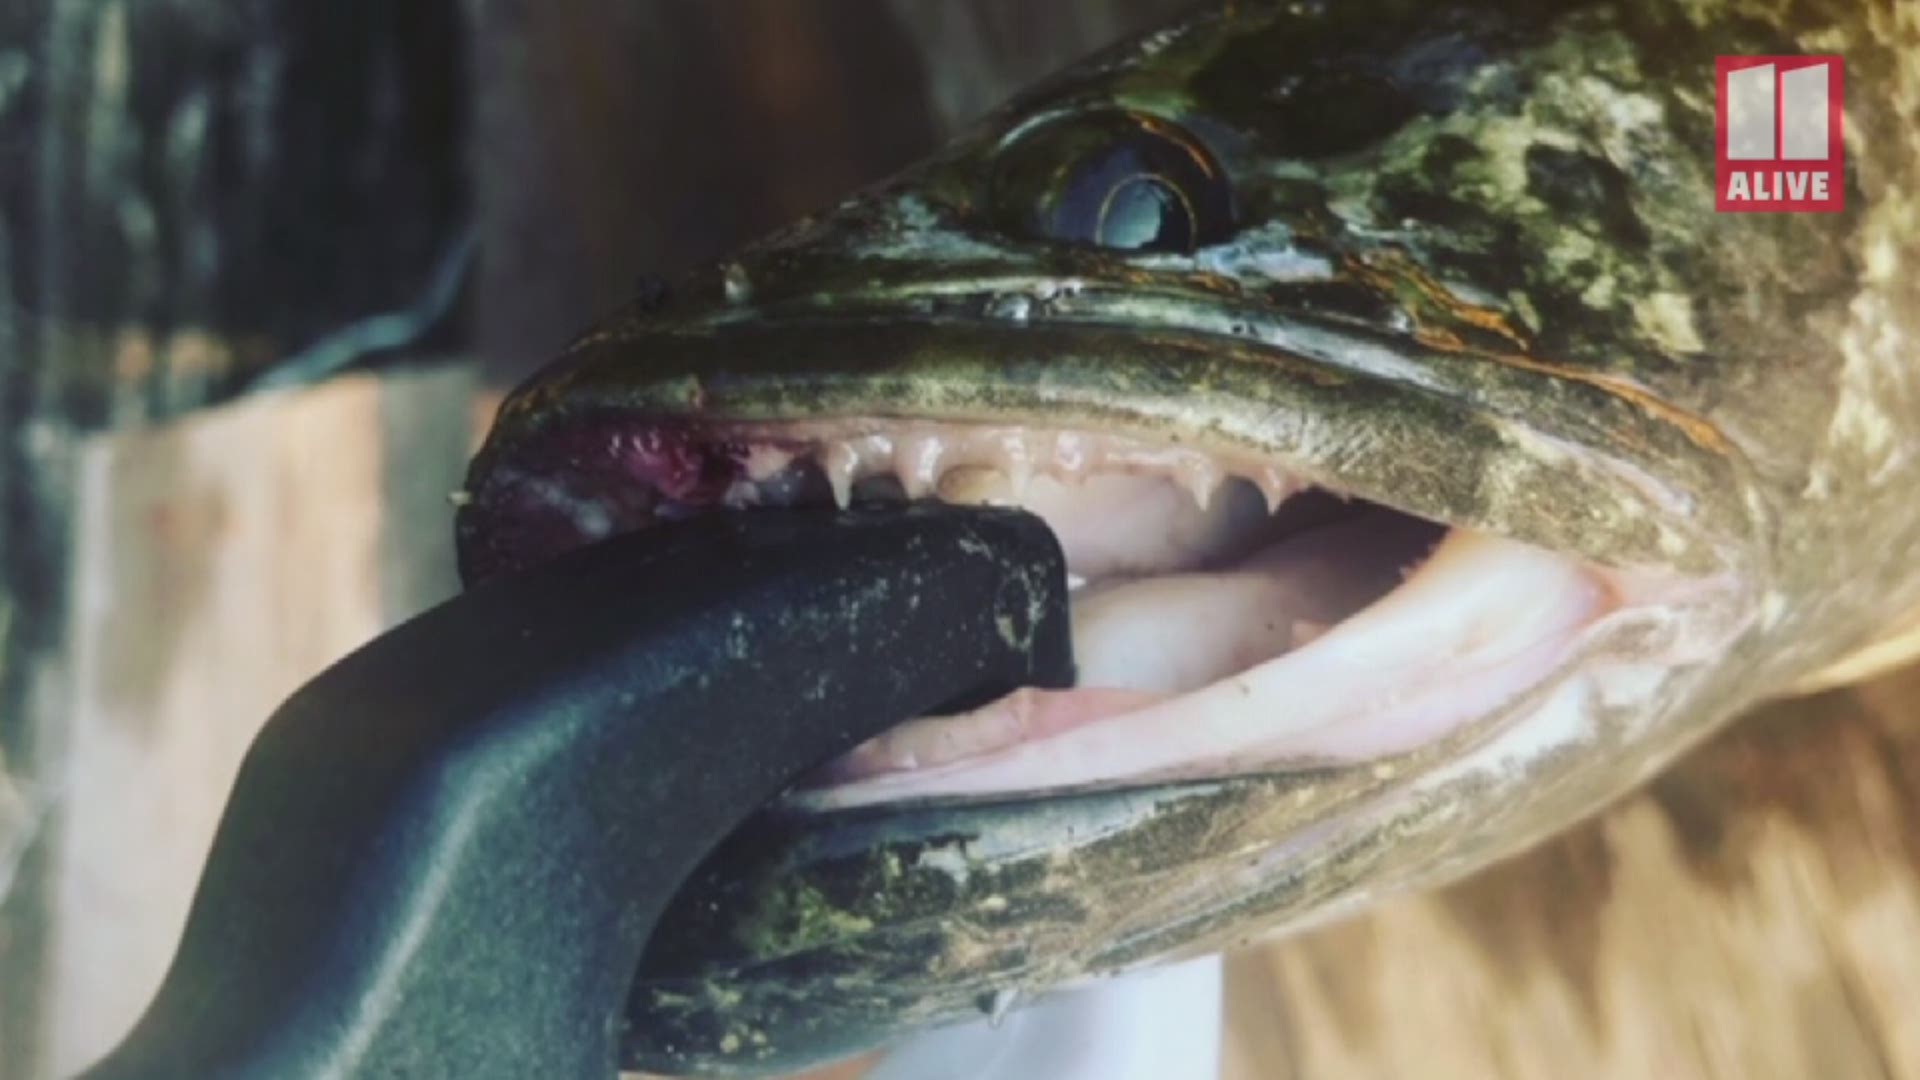 Hear from the fisherman who caught the creature who can breath in land and on water and why the DNR says you should kill Northern Snakehead Fish IMMEDIATELY!